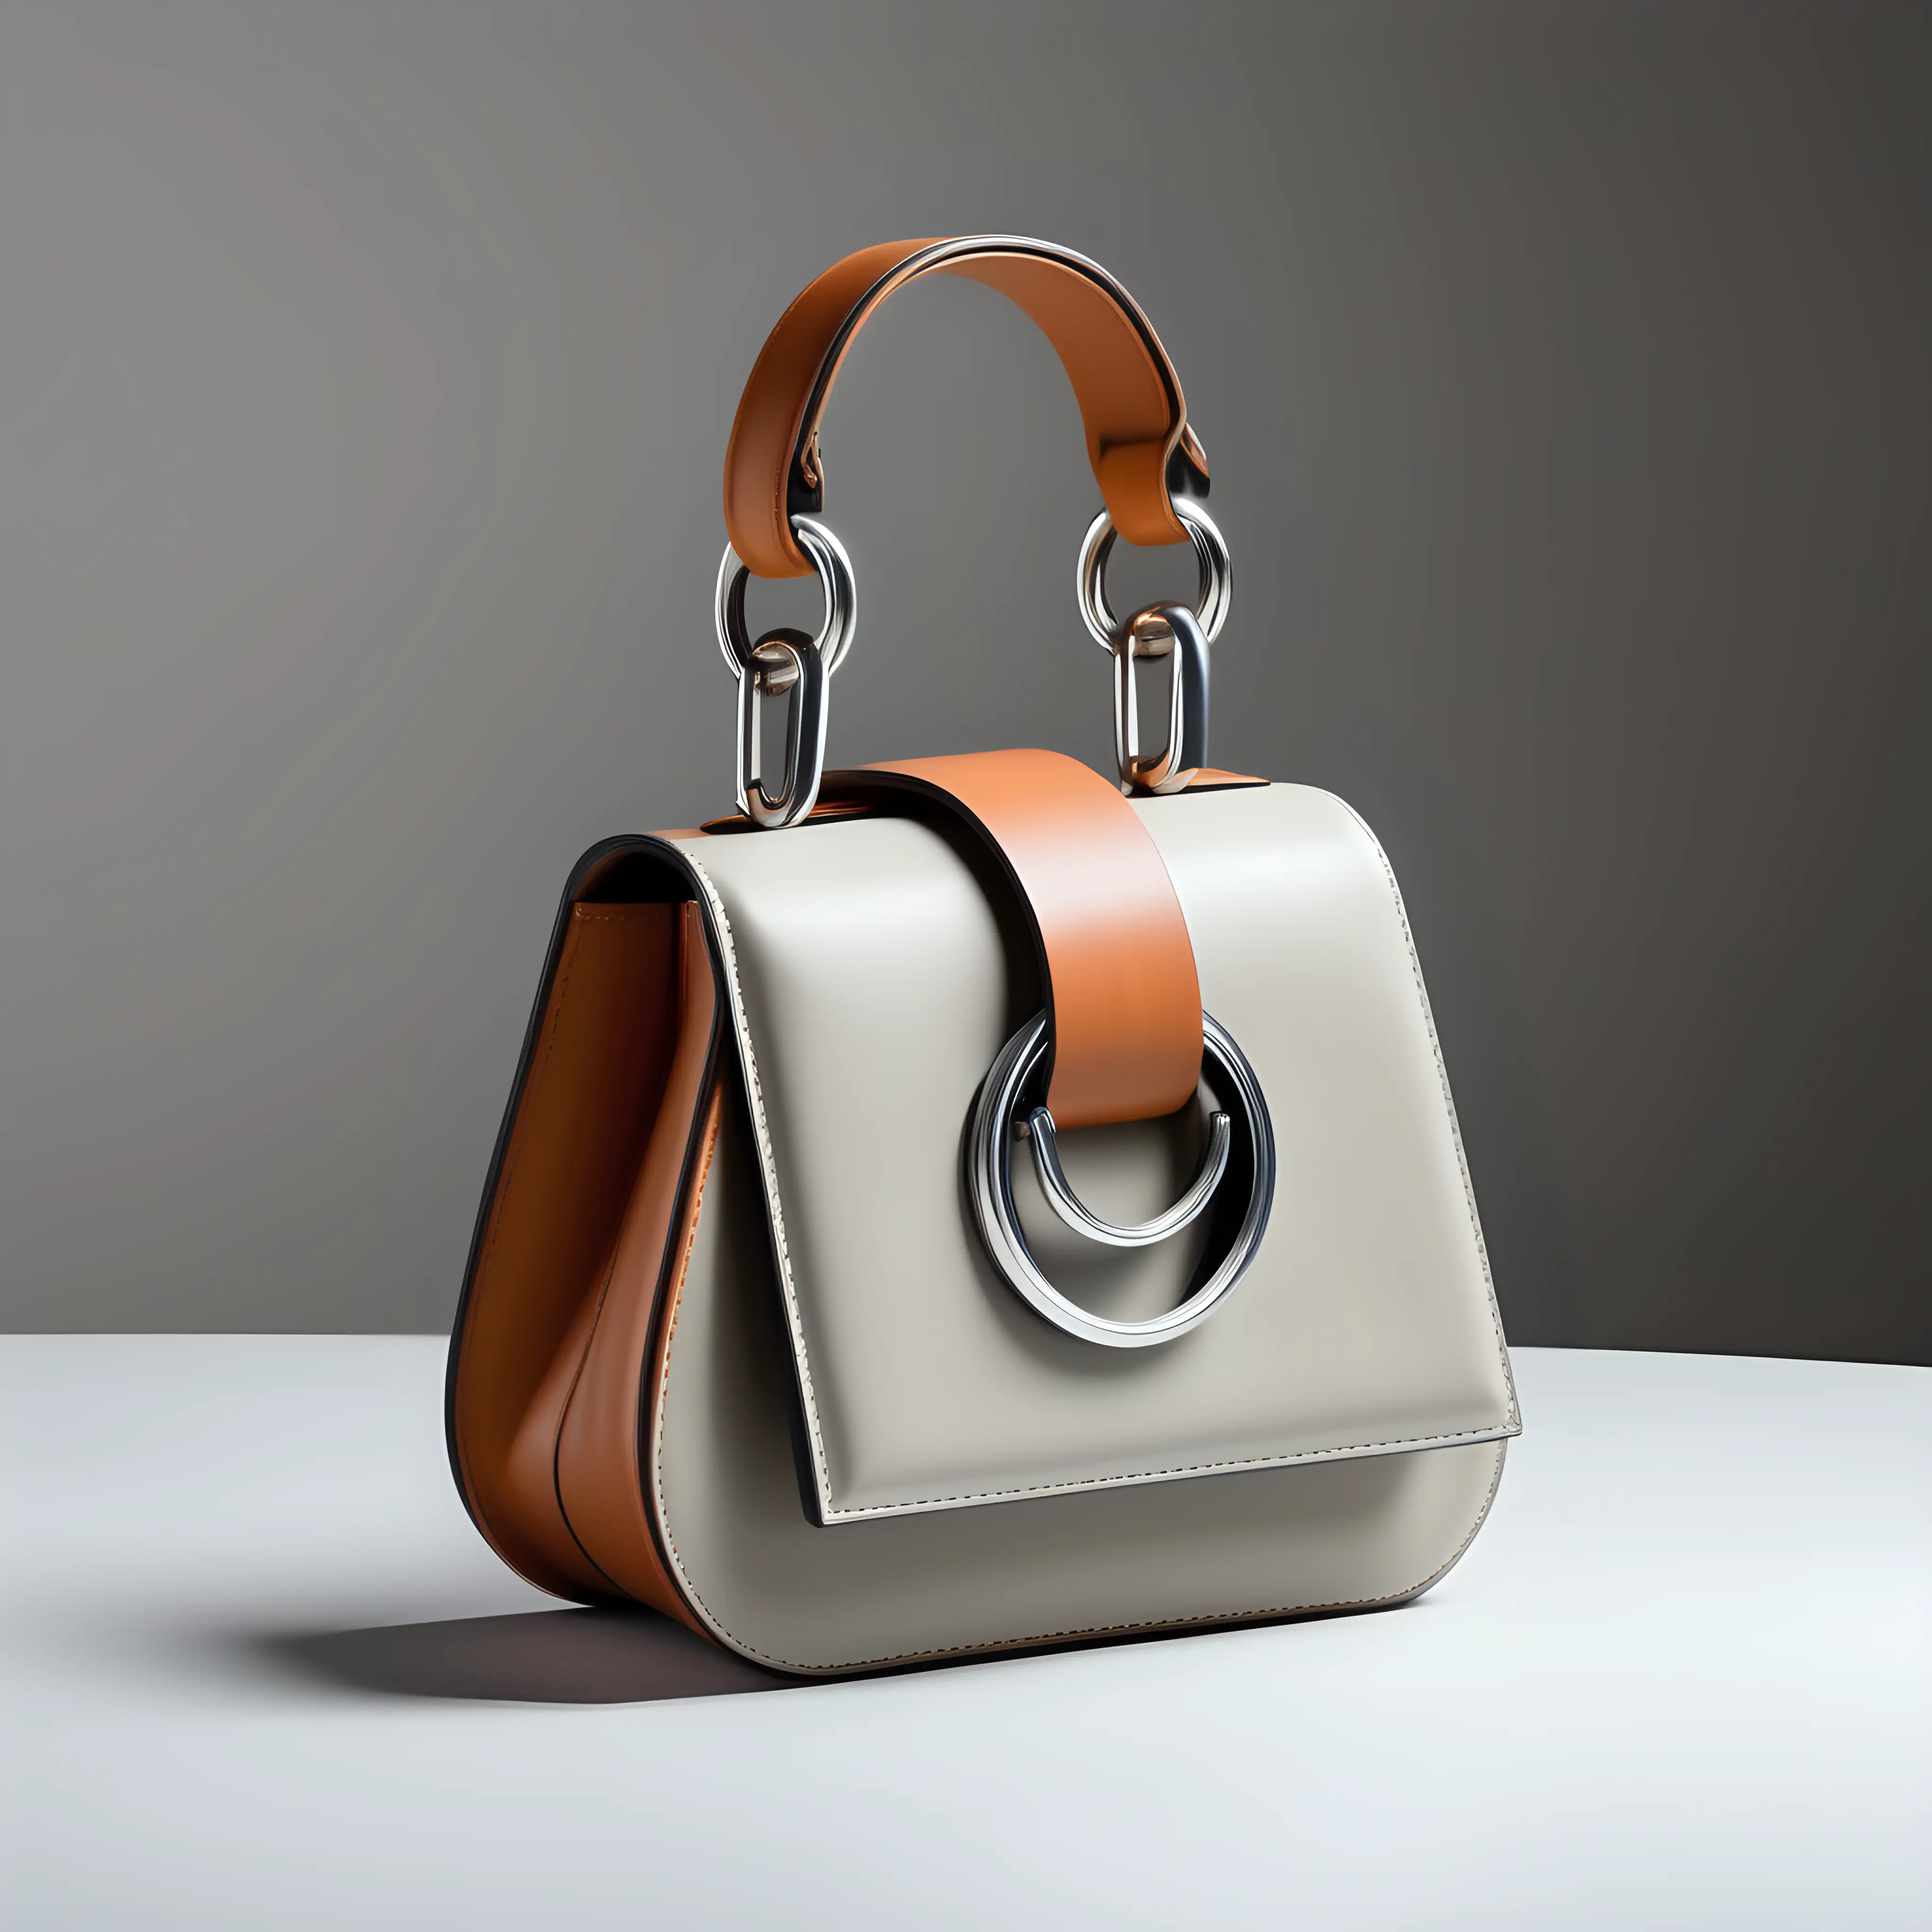 Optical illusione inspired luxury small leather bag - one handle - innovative shape - metal buckle - frontal view - neutral colors 